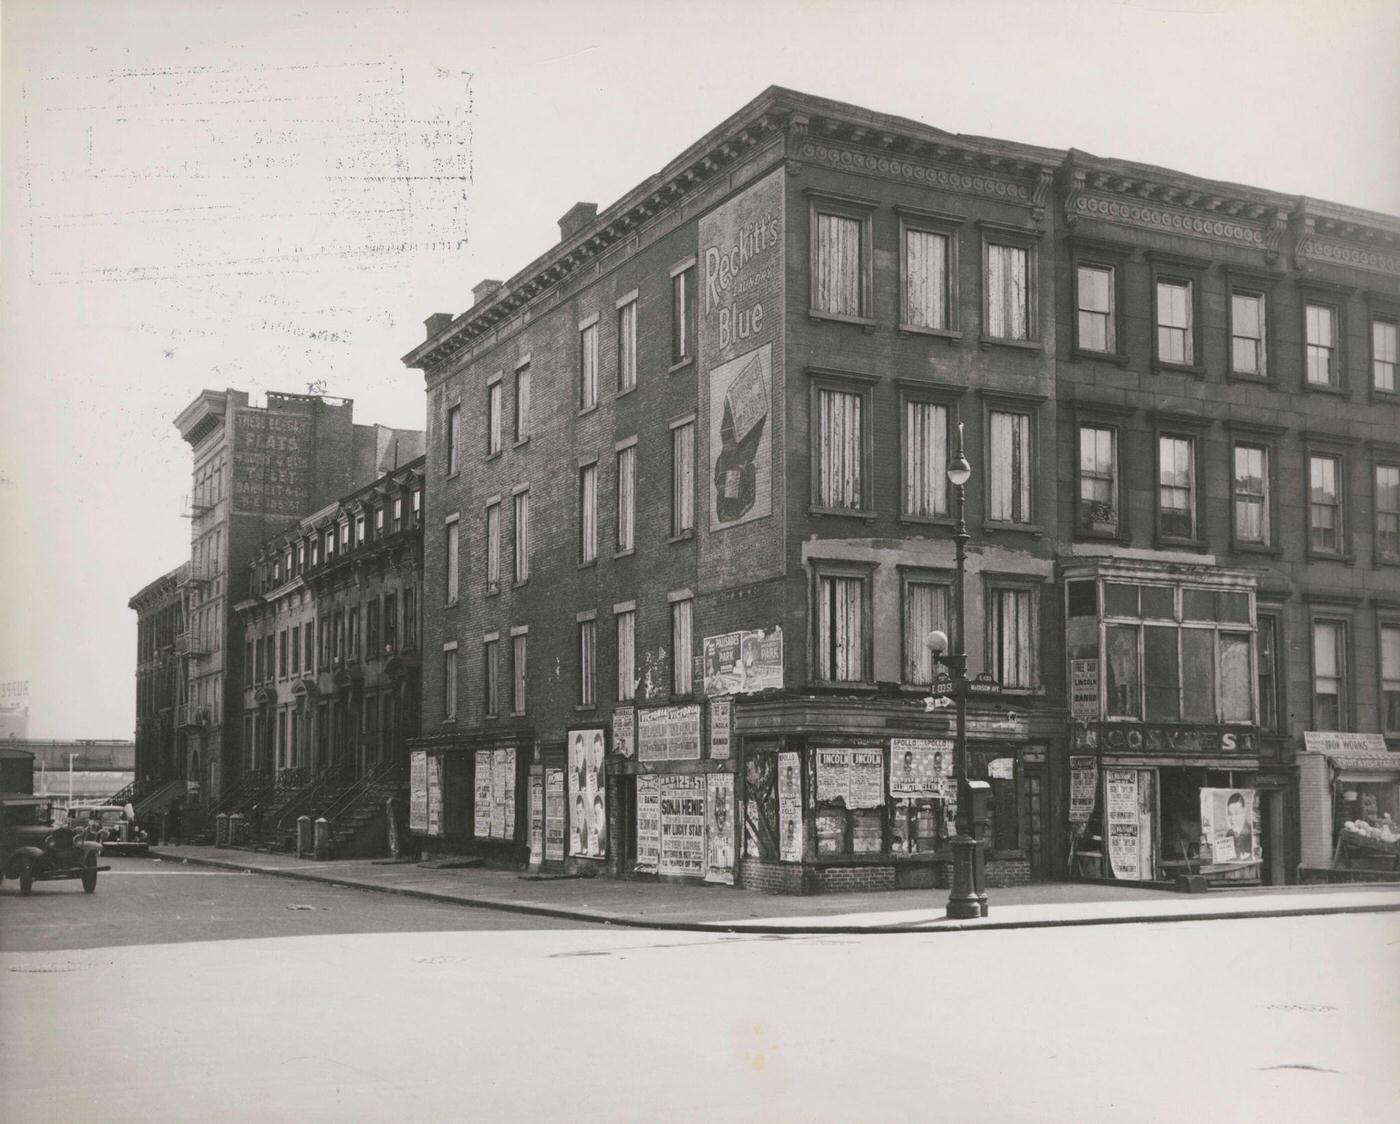 Boarded Residential Building On The Corner Of Madison Avenue And East 133Rd Street, Harlem, Manhattan, 1938